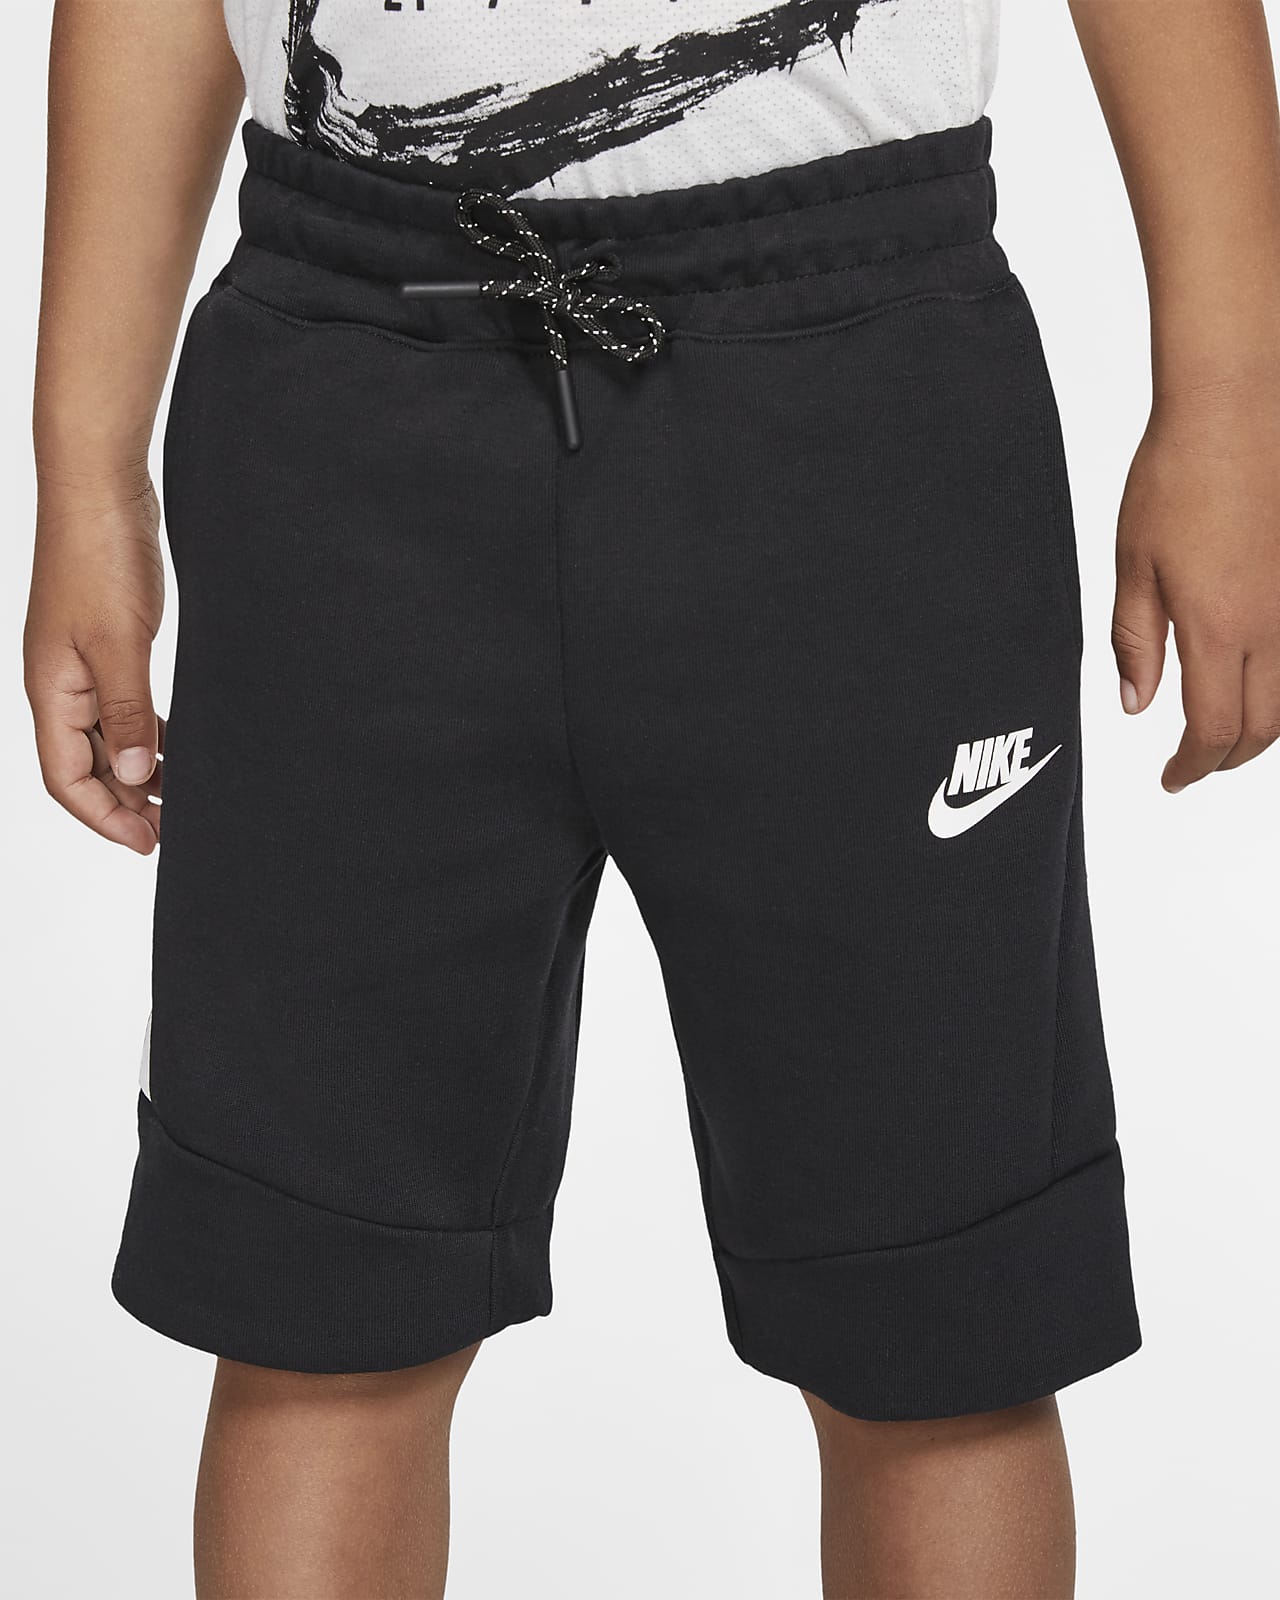 5 Day Nike Club Fleece Workout Shorts for Beginner